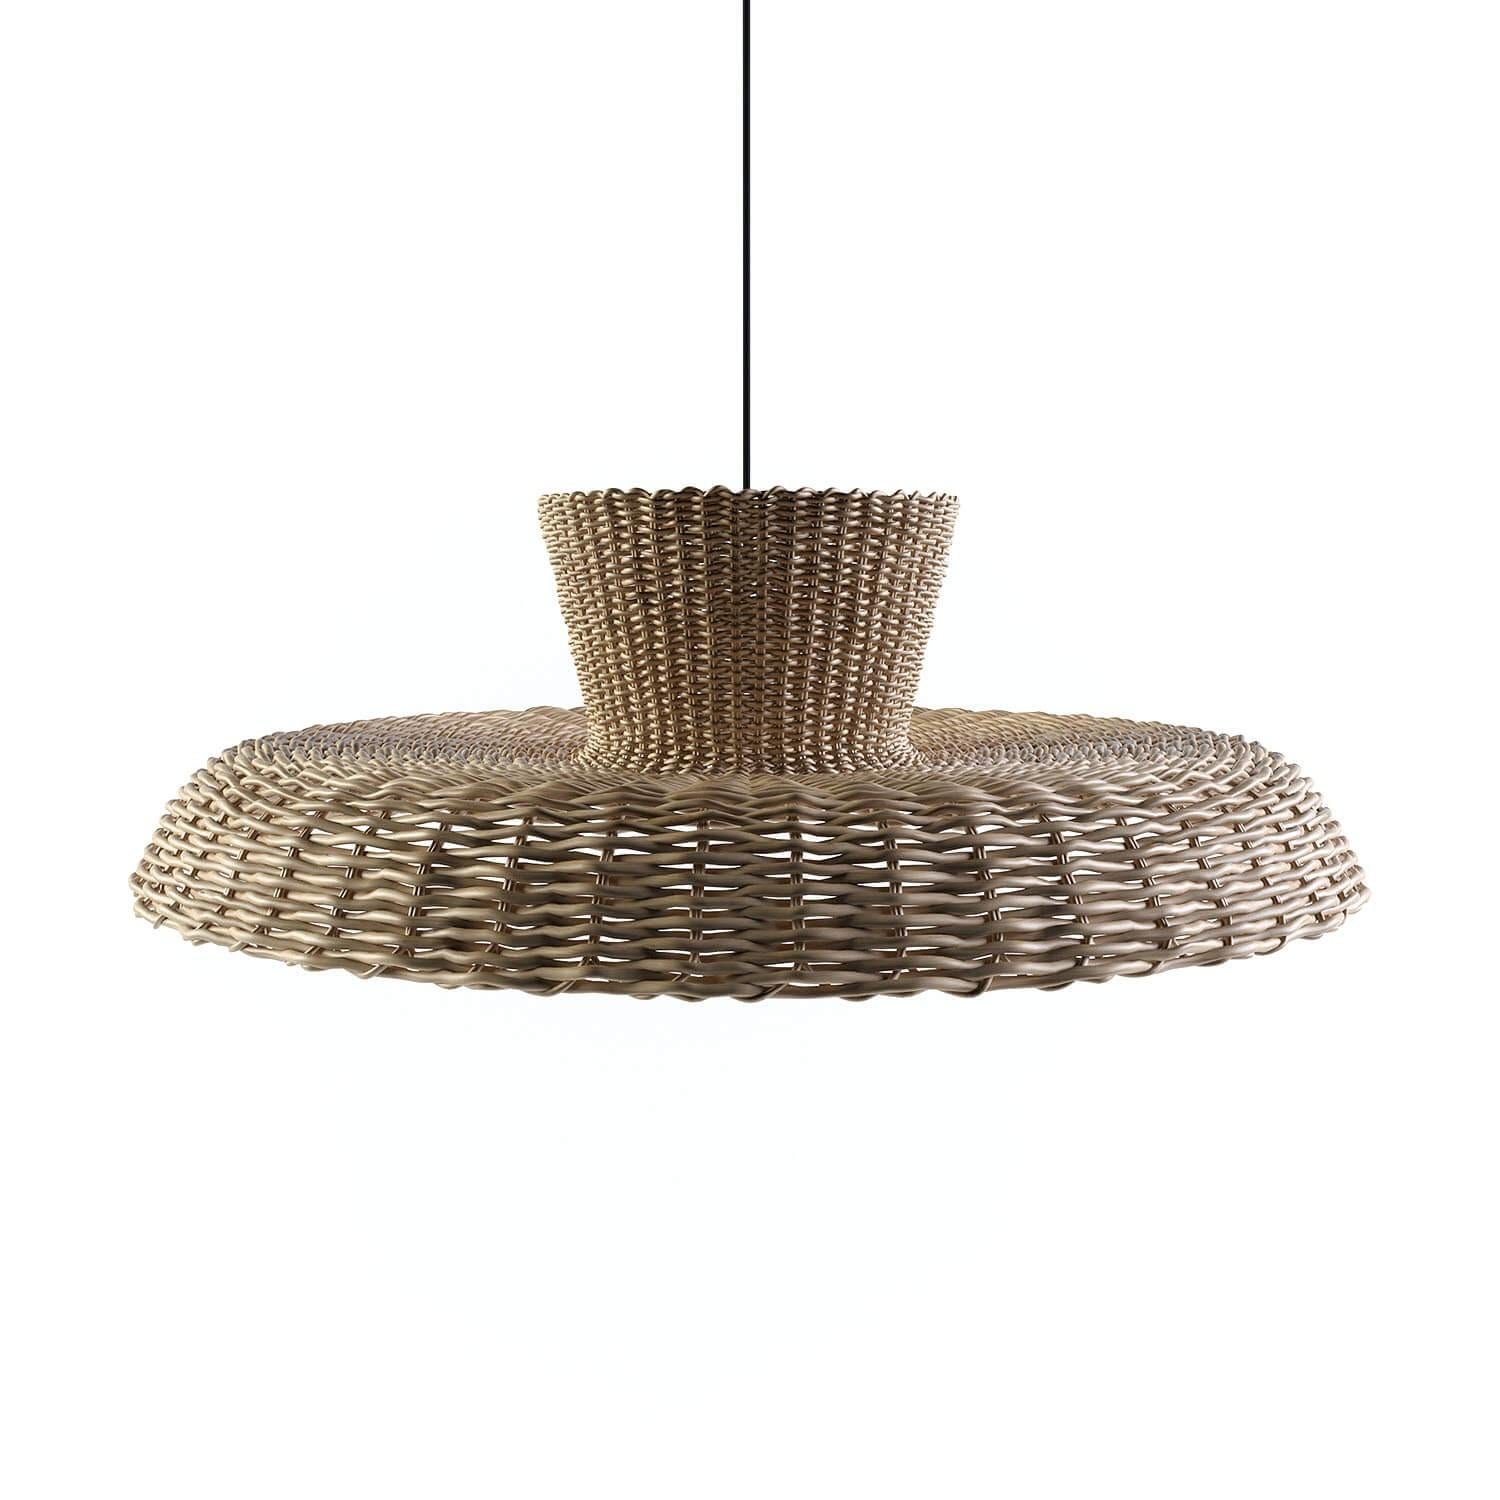 Small Strikha Pendant Lamp by Faina
Design: Victoriya Yakusha
Material: Willow, steel frame
Dimensions: D 90 x H 28 cm


Cable length - 3m
Cable type - 2x0.5
Steel wire rope with a clamp x3
E27 bulb x 1
Ceiling fixture x 1, 3x40mm dowel